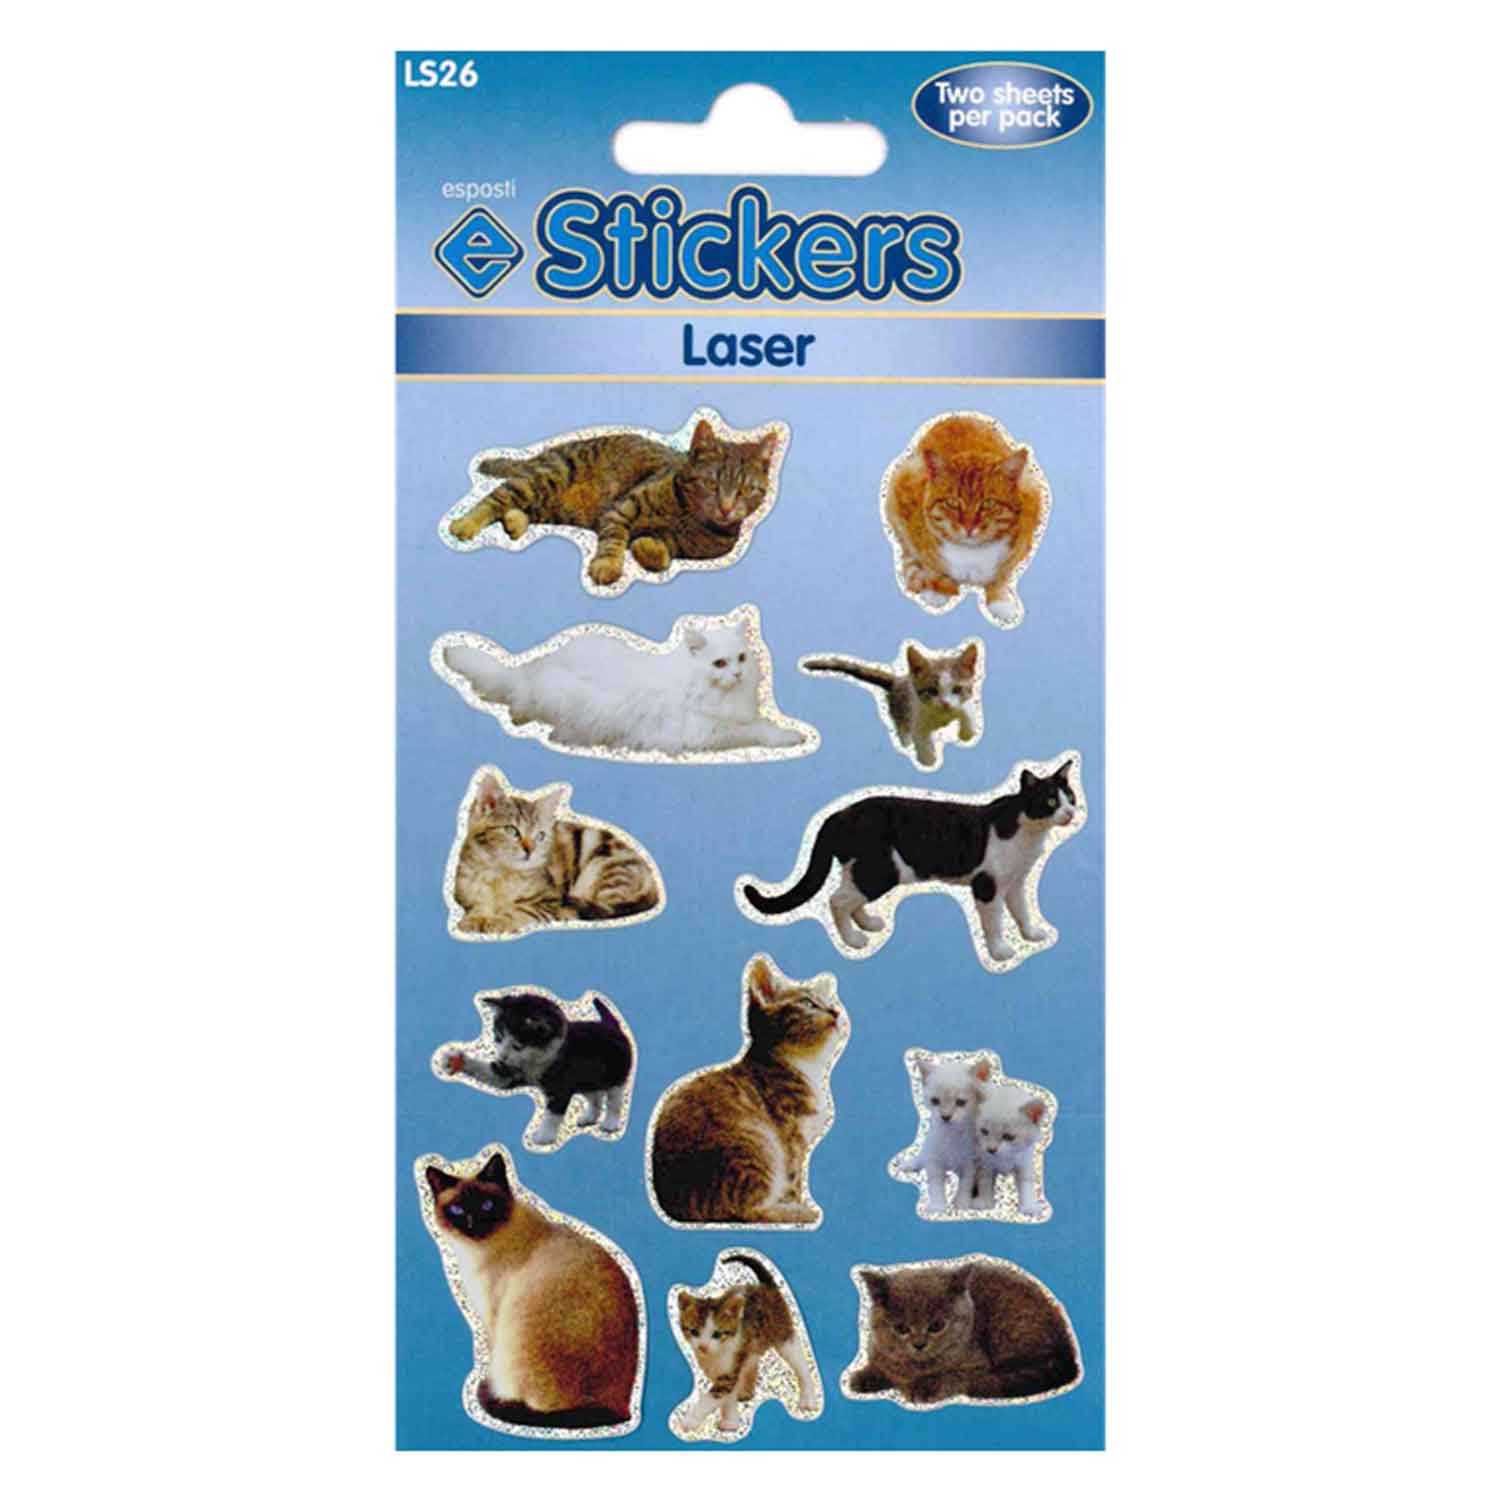 Cats & Kittens Self Adhesive Laser Novelty Stickers - Pack of 10